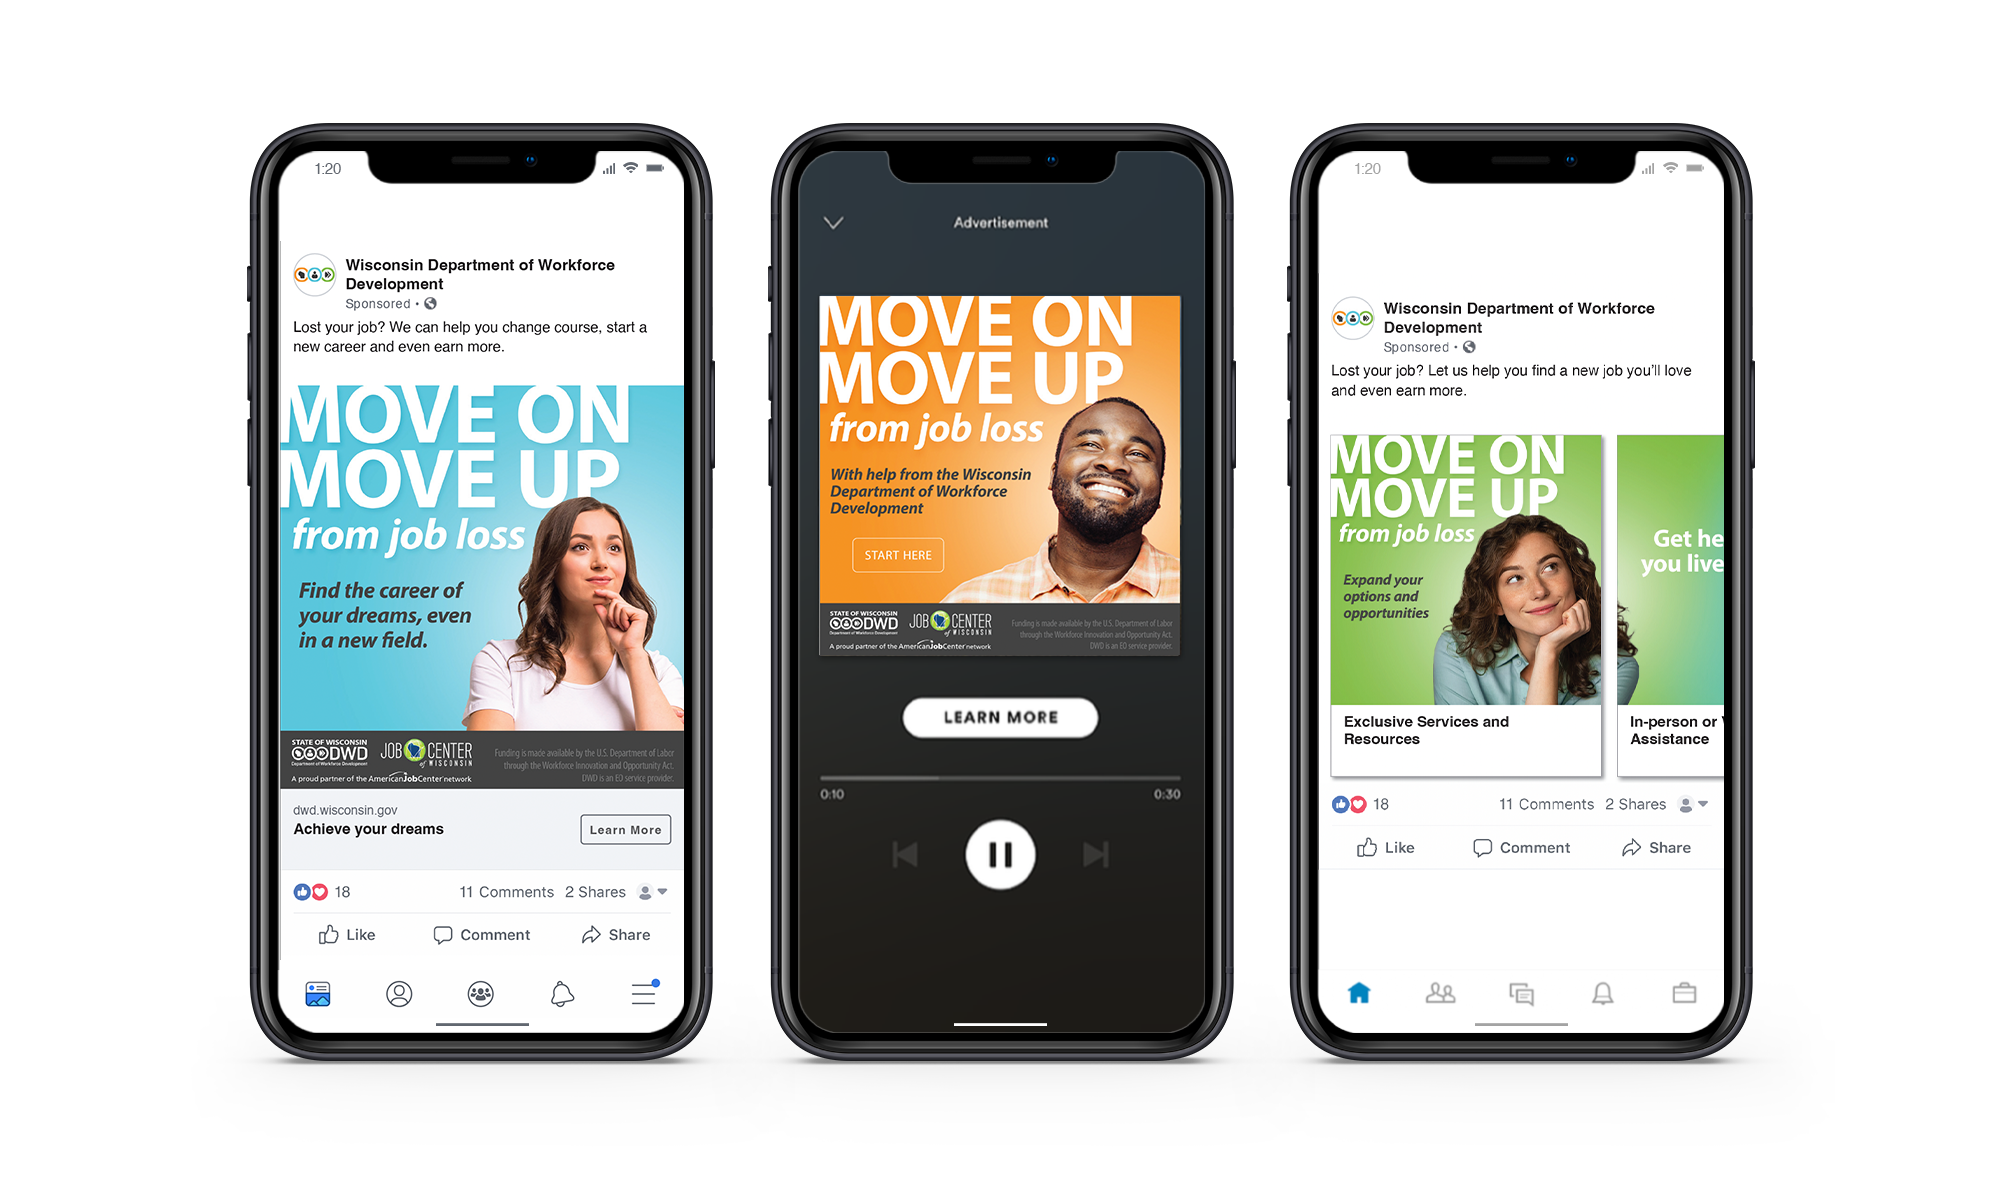 Three Wisconsin Department of Workforce Development ads with move on move up headline displayed on mobile phone screens